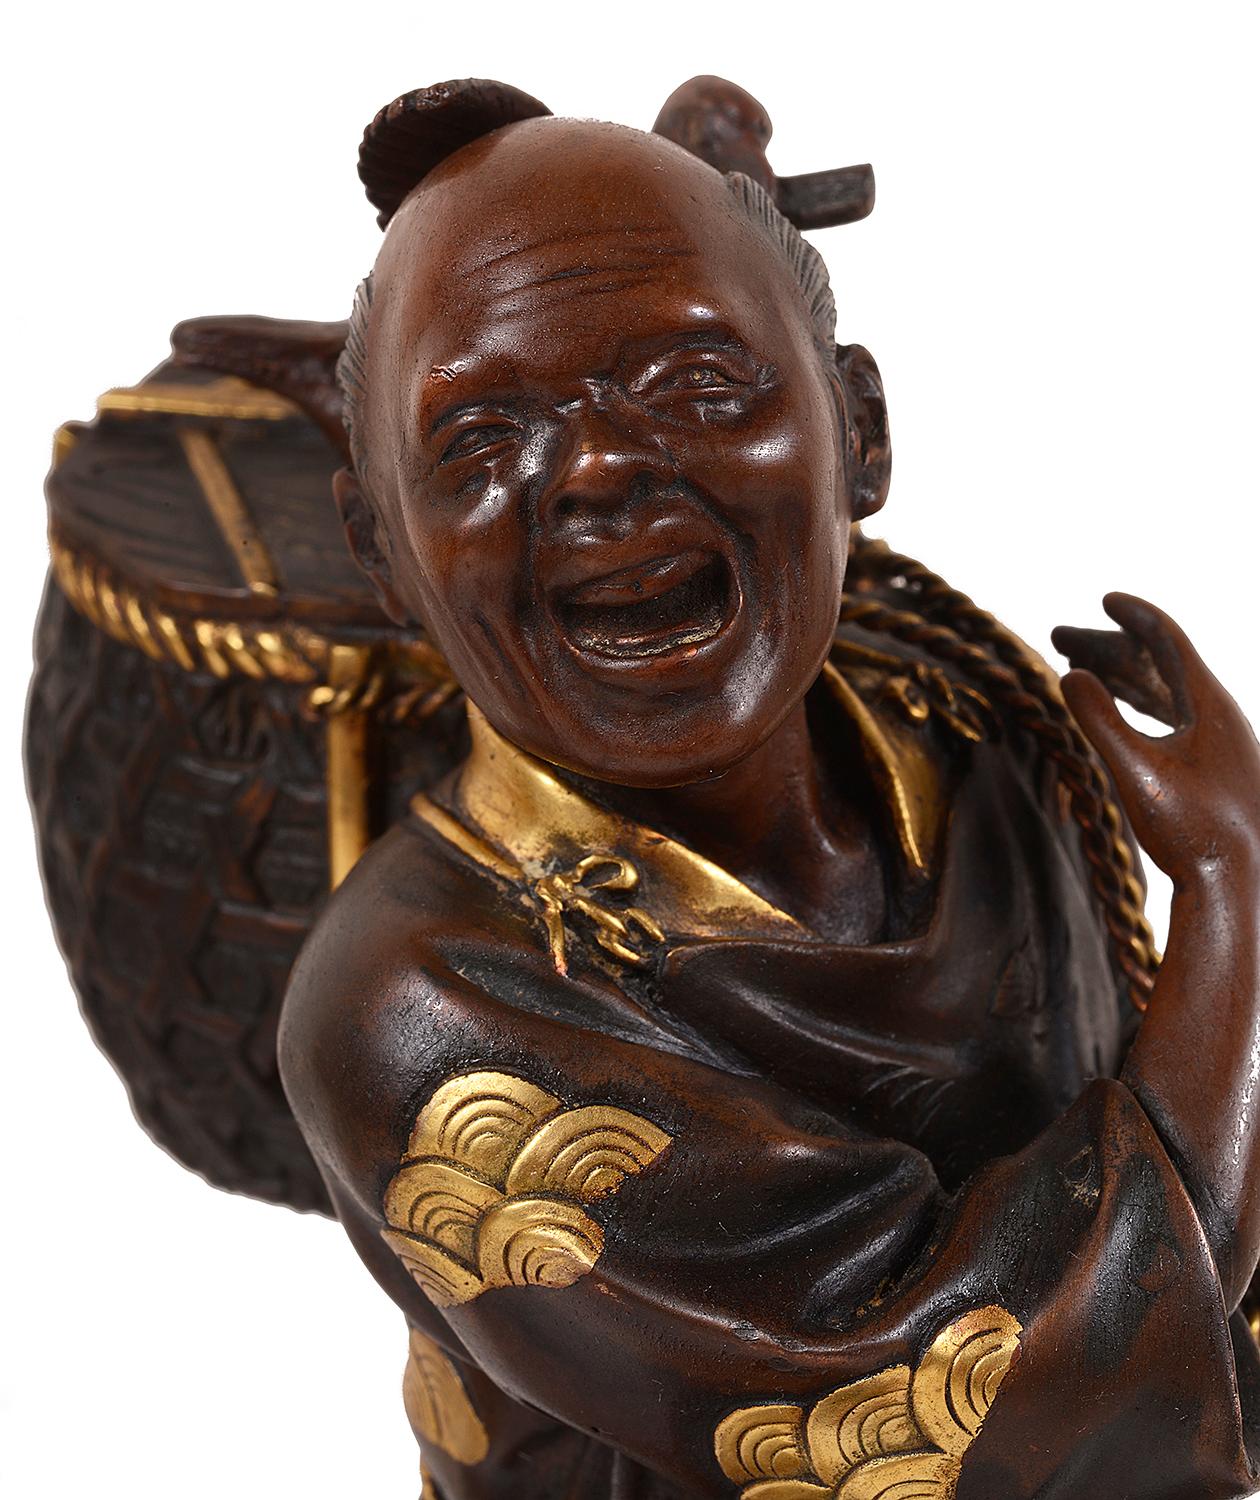 A fine quality late 19th century Meiji period (1868-1912) Miayo patinated bronze statue of a bird catch carrying a basket on his back, with gilded highlights, mounted on a carved hardwood base also with gilded decoration.